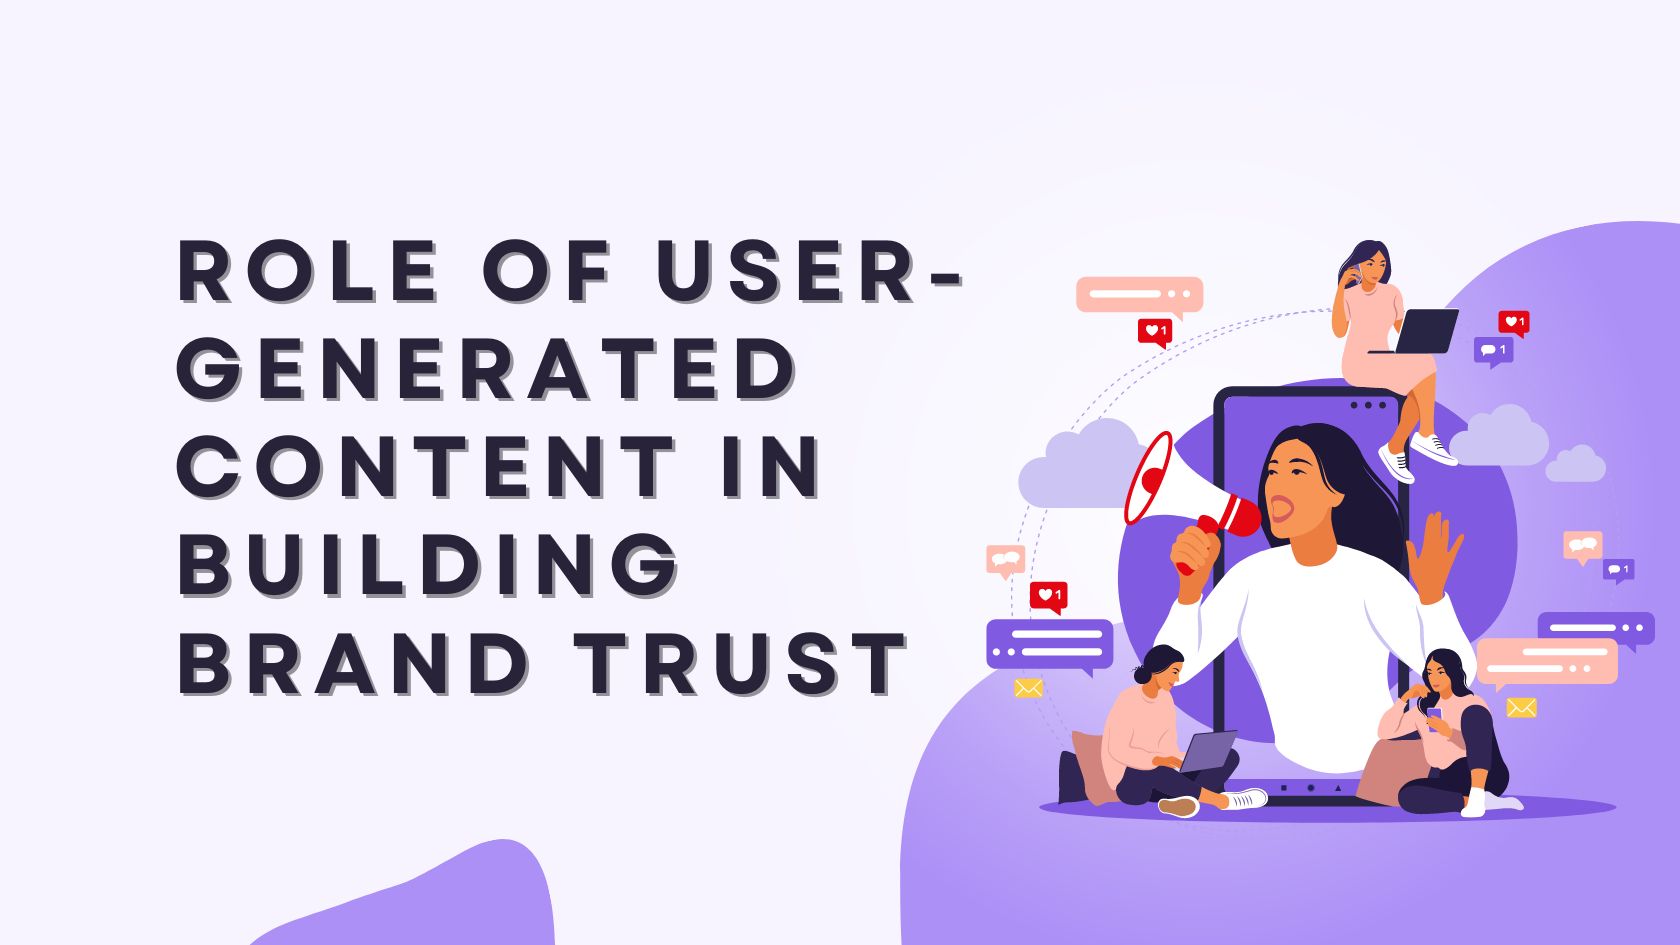 User-generated content (UGC) for building brand trust